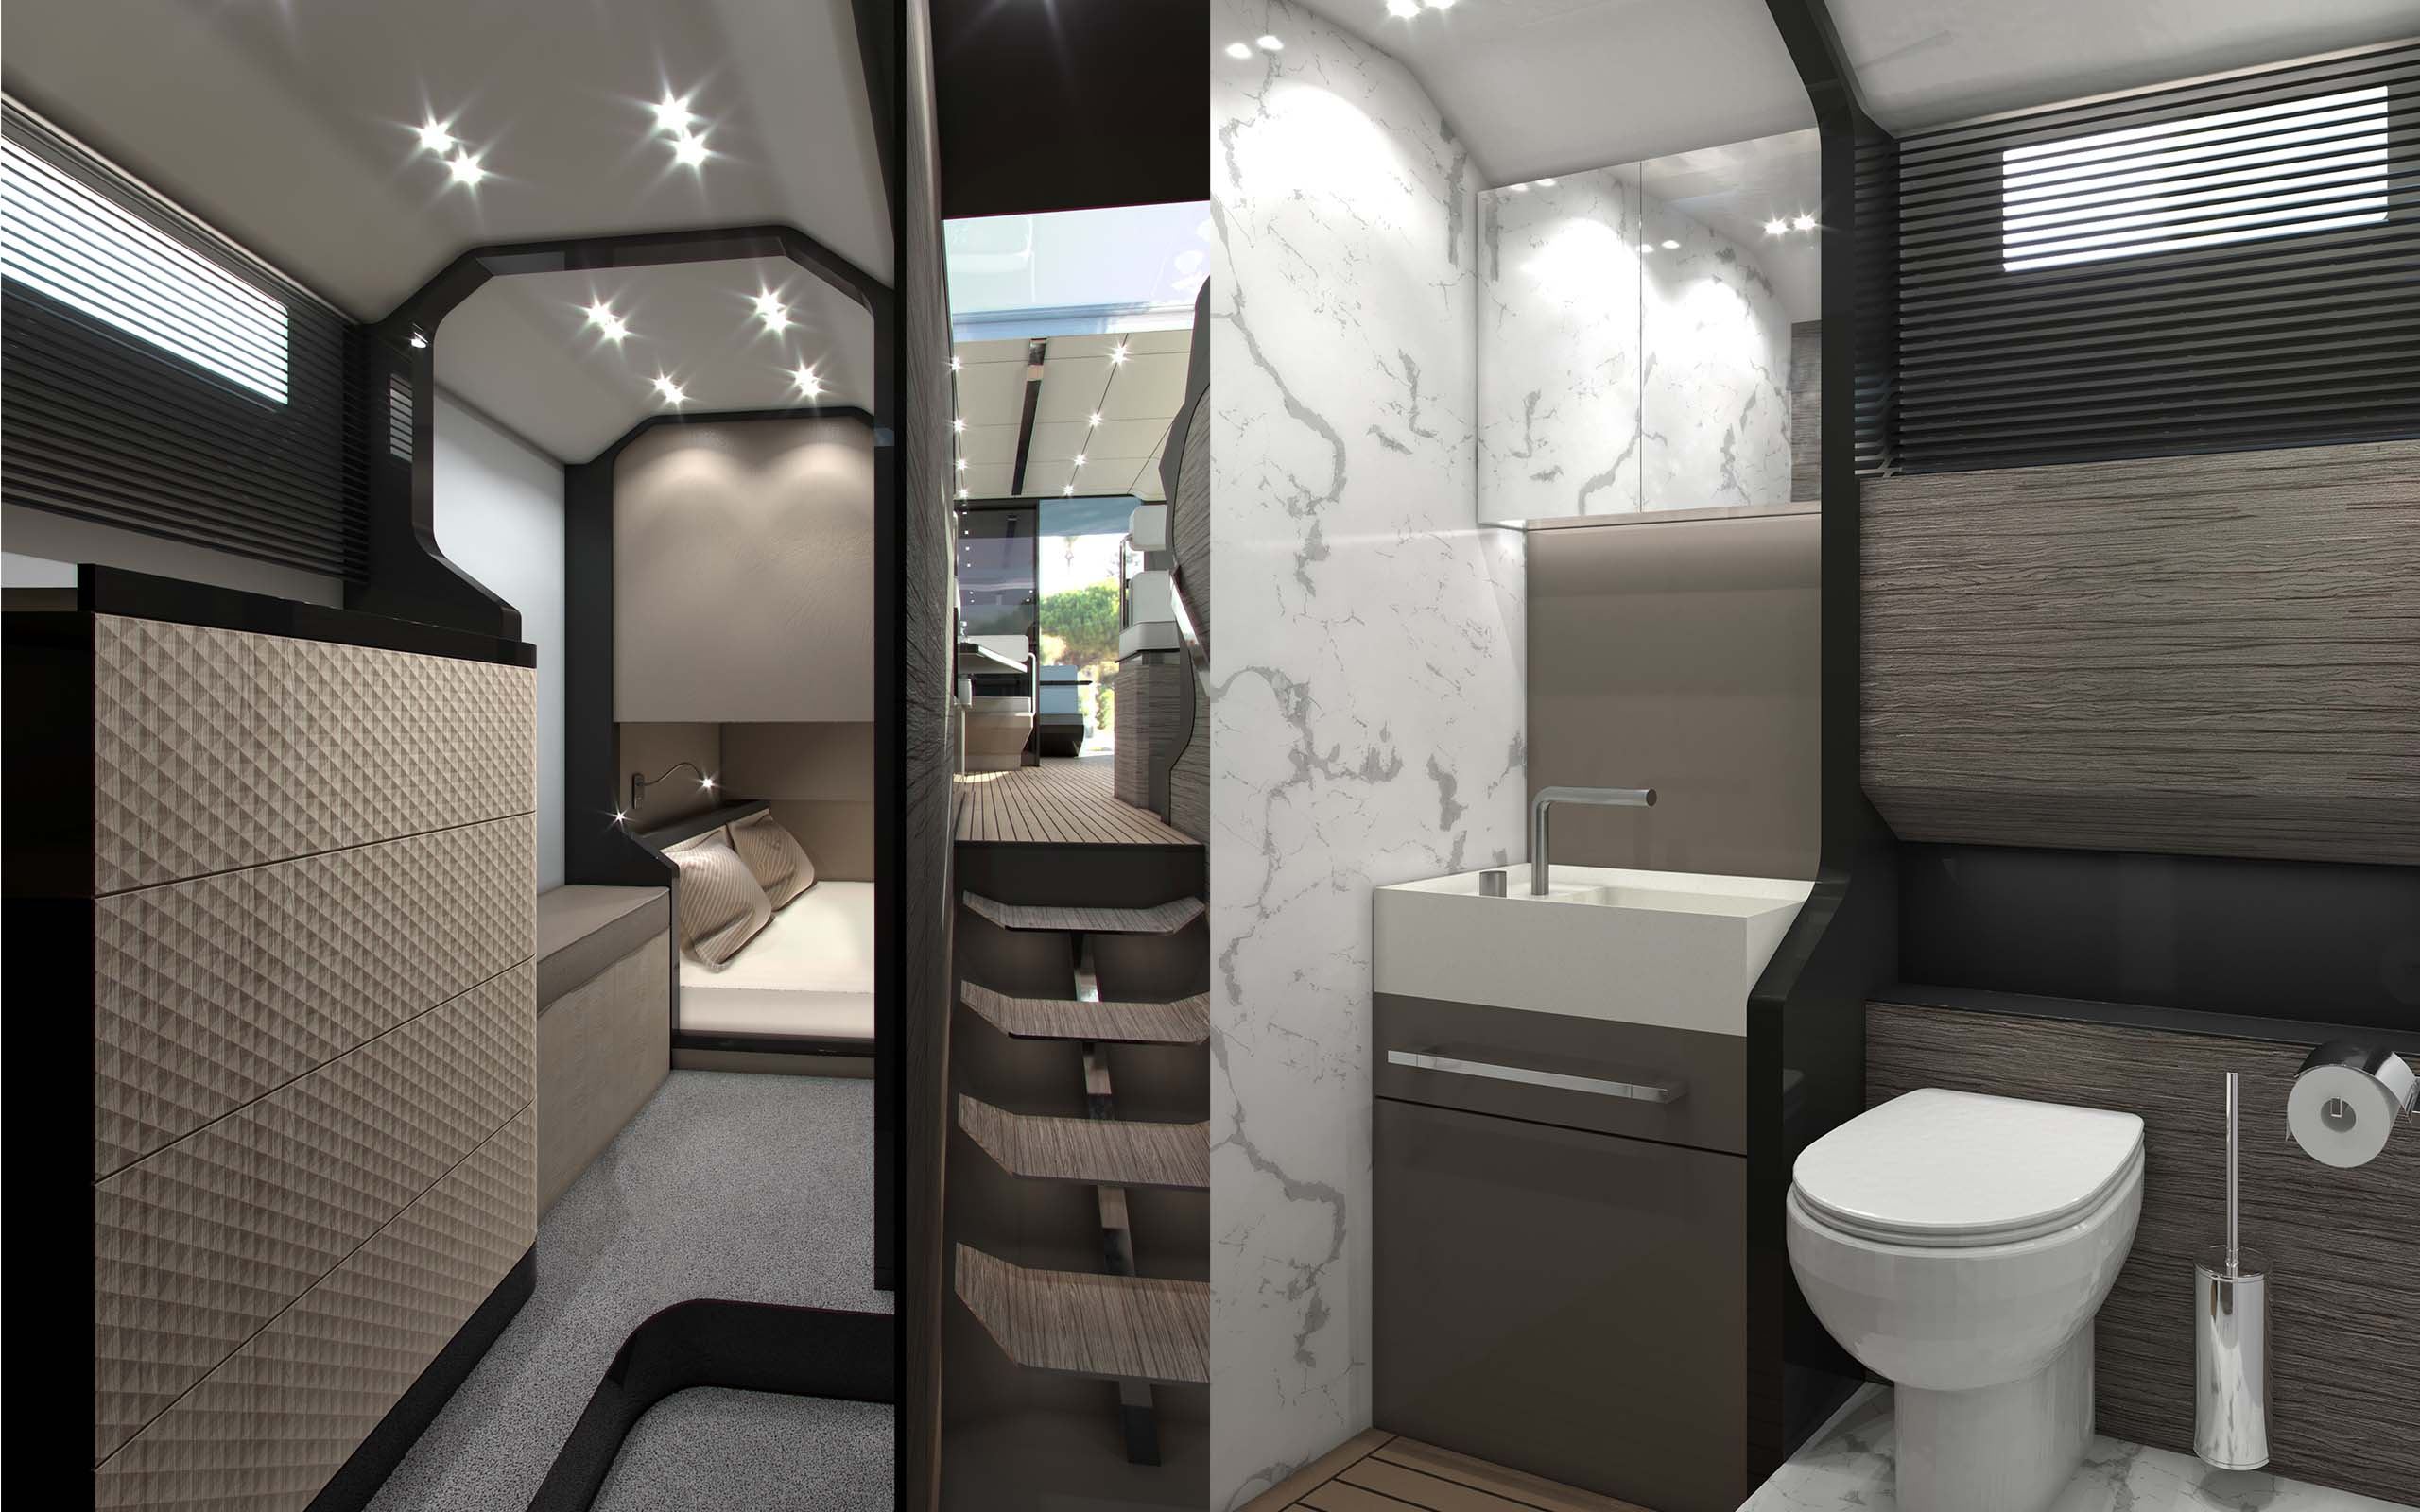 Motor Yacht 40ft Bedroom bespoke yacht furniture and WC by Suvorov Yacht Design